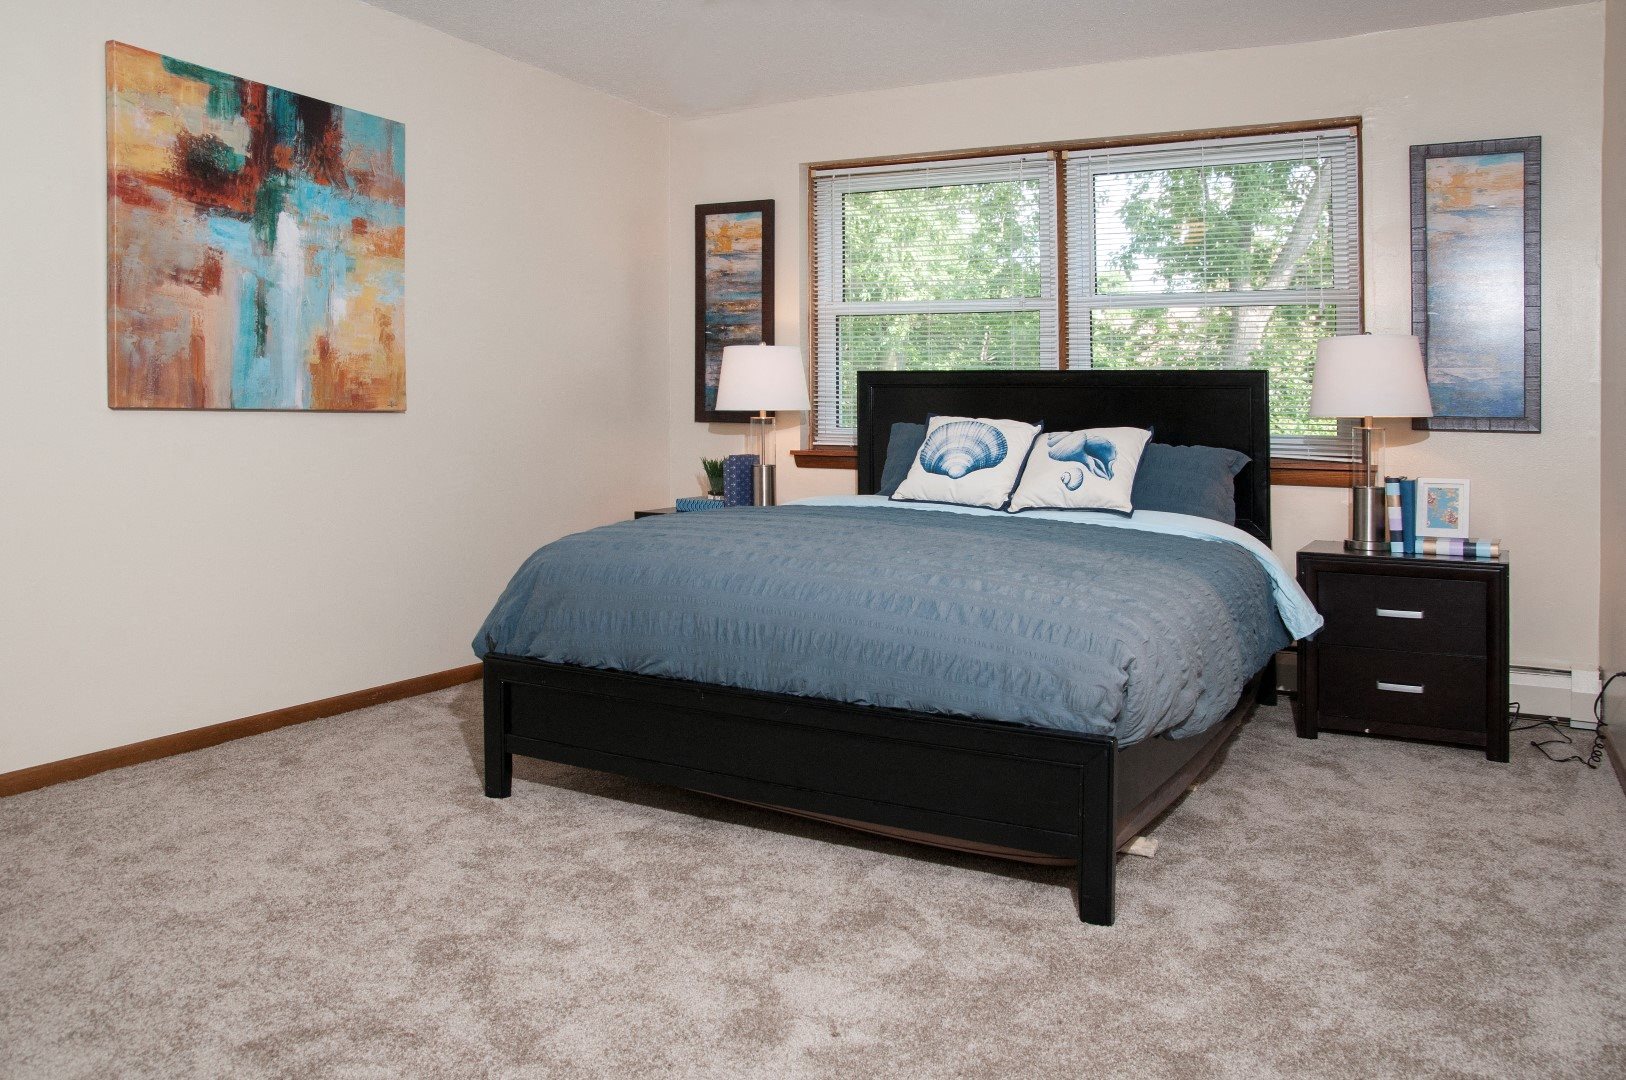 2416 Blaisdell apartments uptown large bedroom